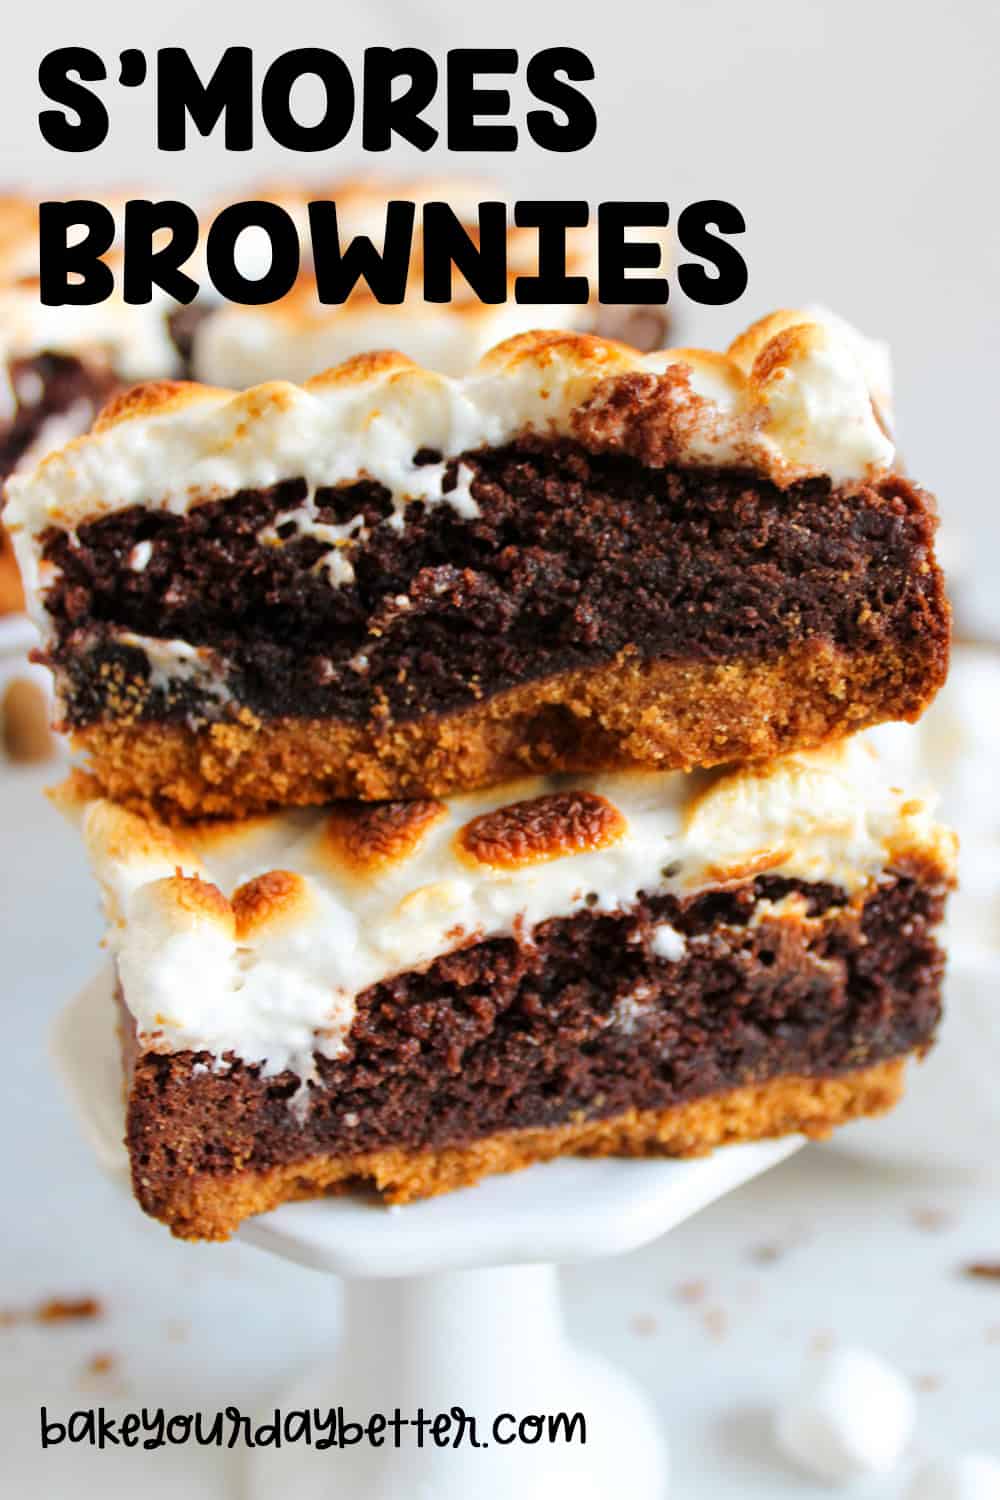 picture of s'mores brownies with text overlay that says: s'mores brownies